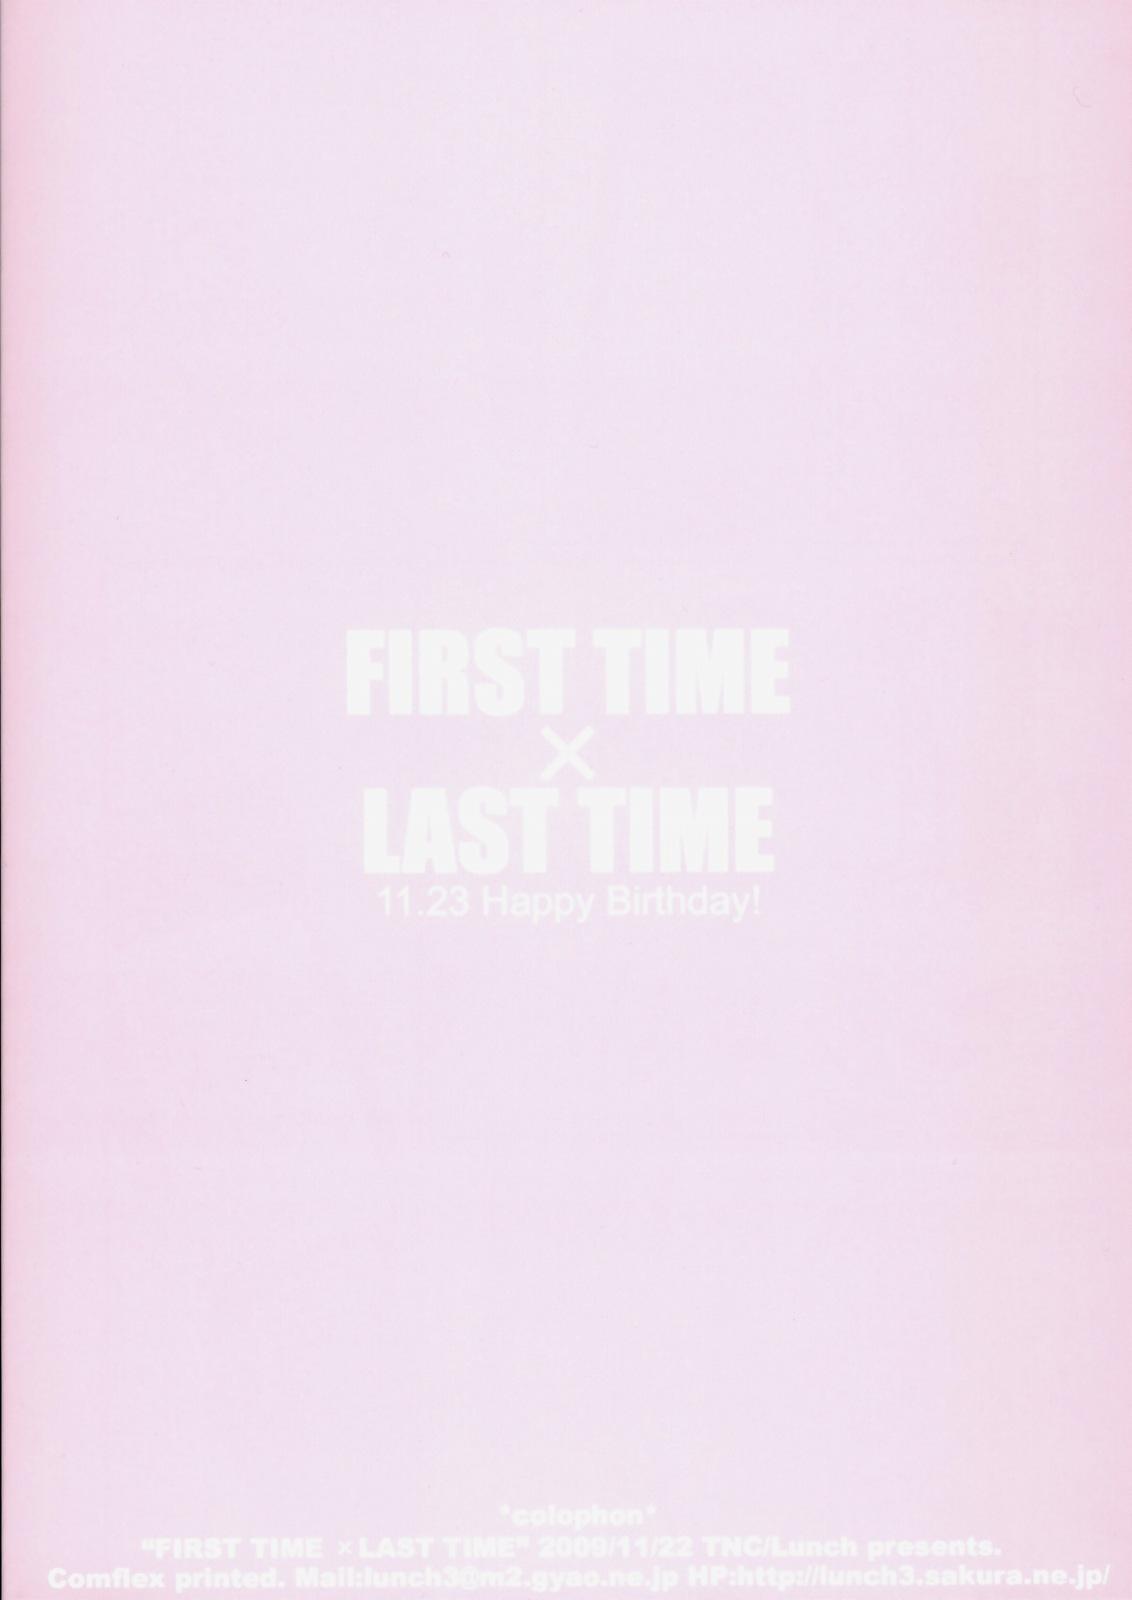 FIRST TIME × LAST TIME 38